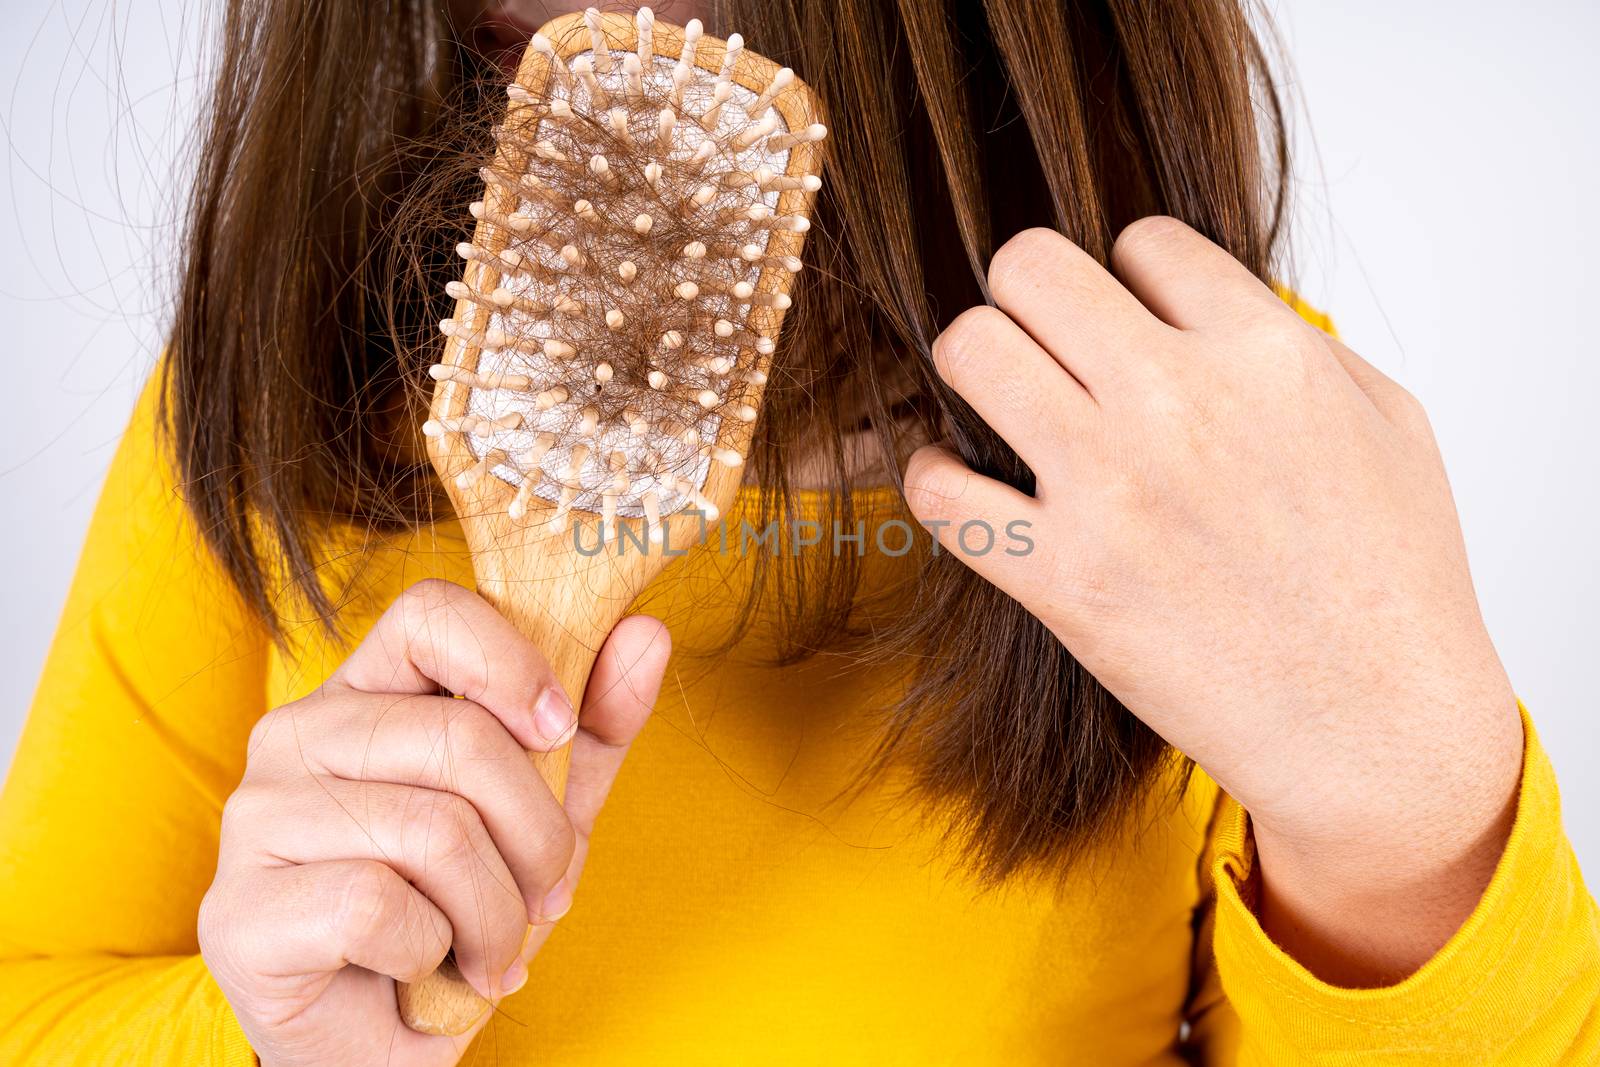 Hair fall problem, closeup hand holding comb and problem hair. Healthcare medical or daily life concept.